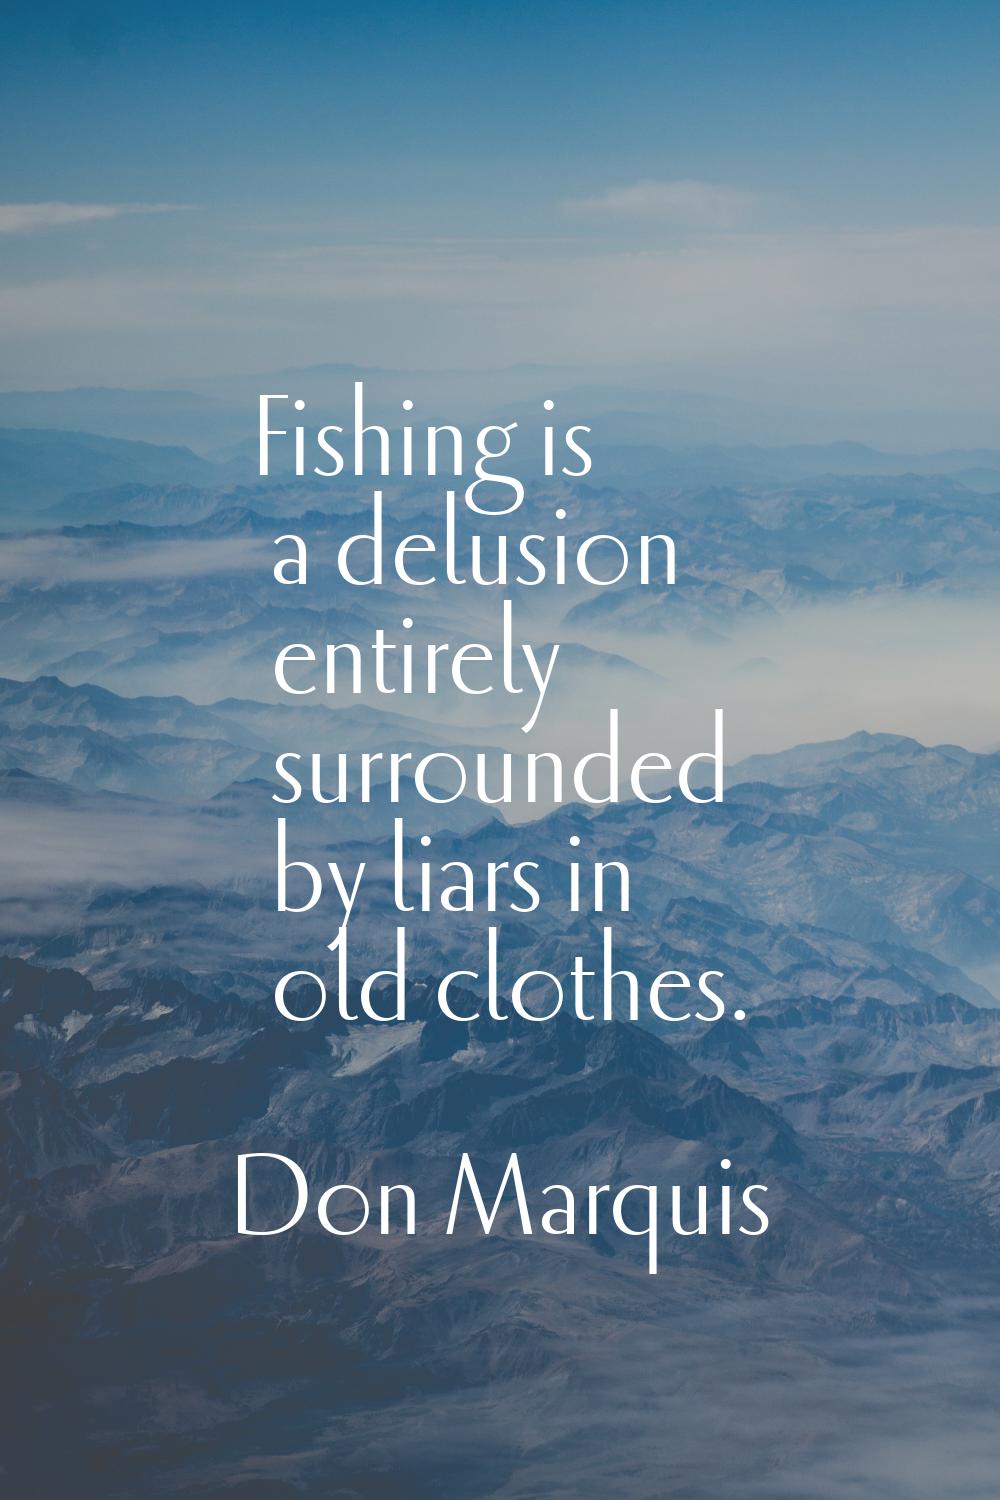 Fishing is a delusion entirely surrounded by liars in old clothes.